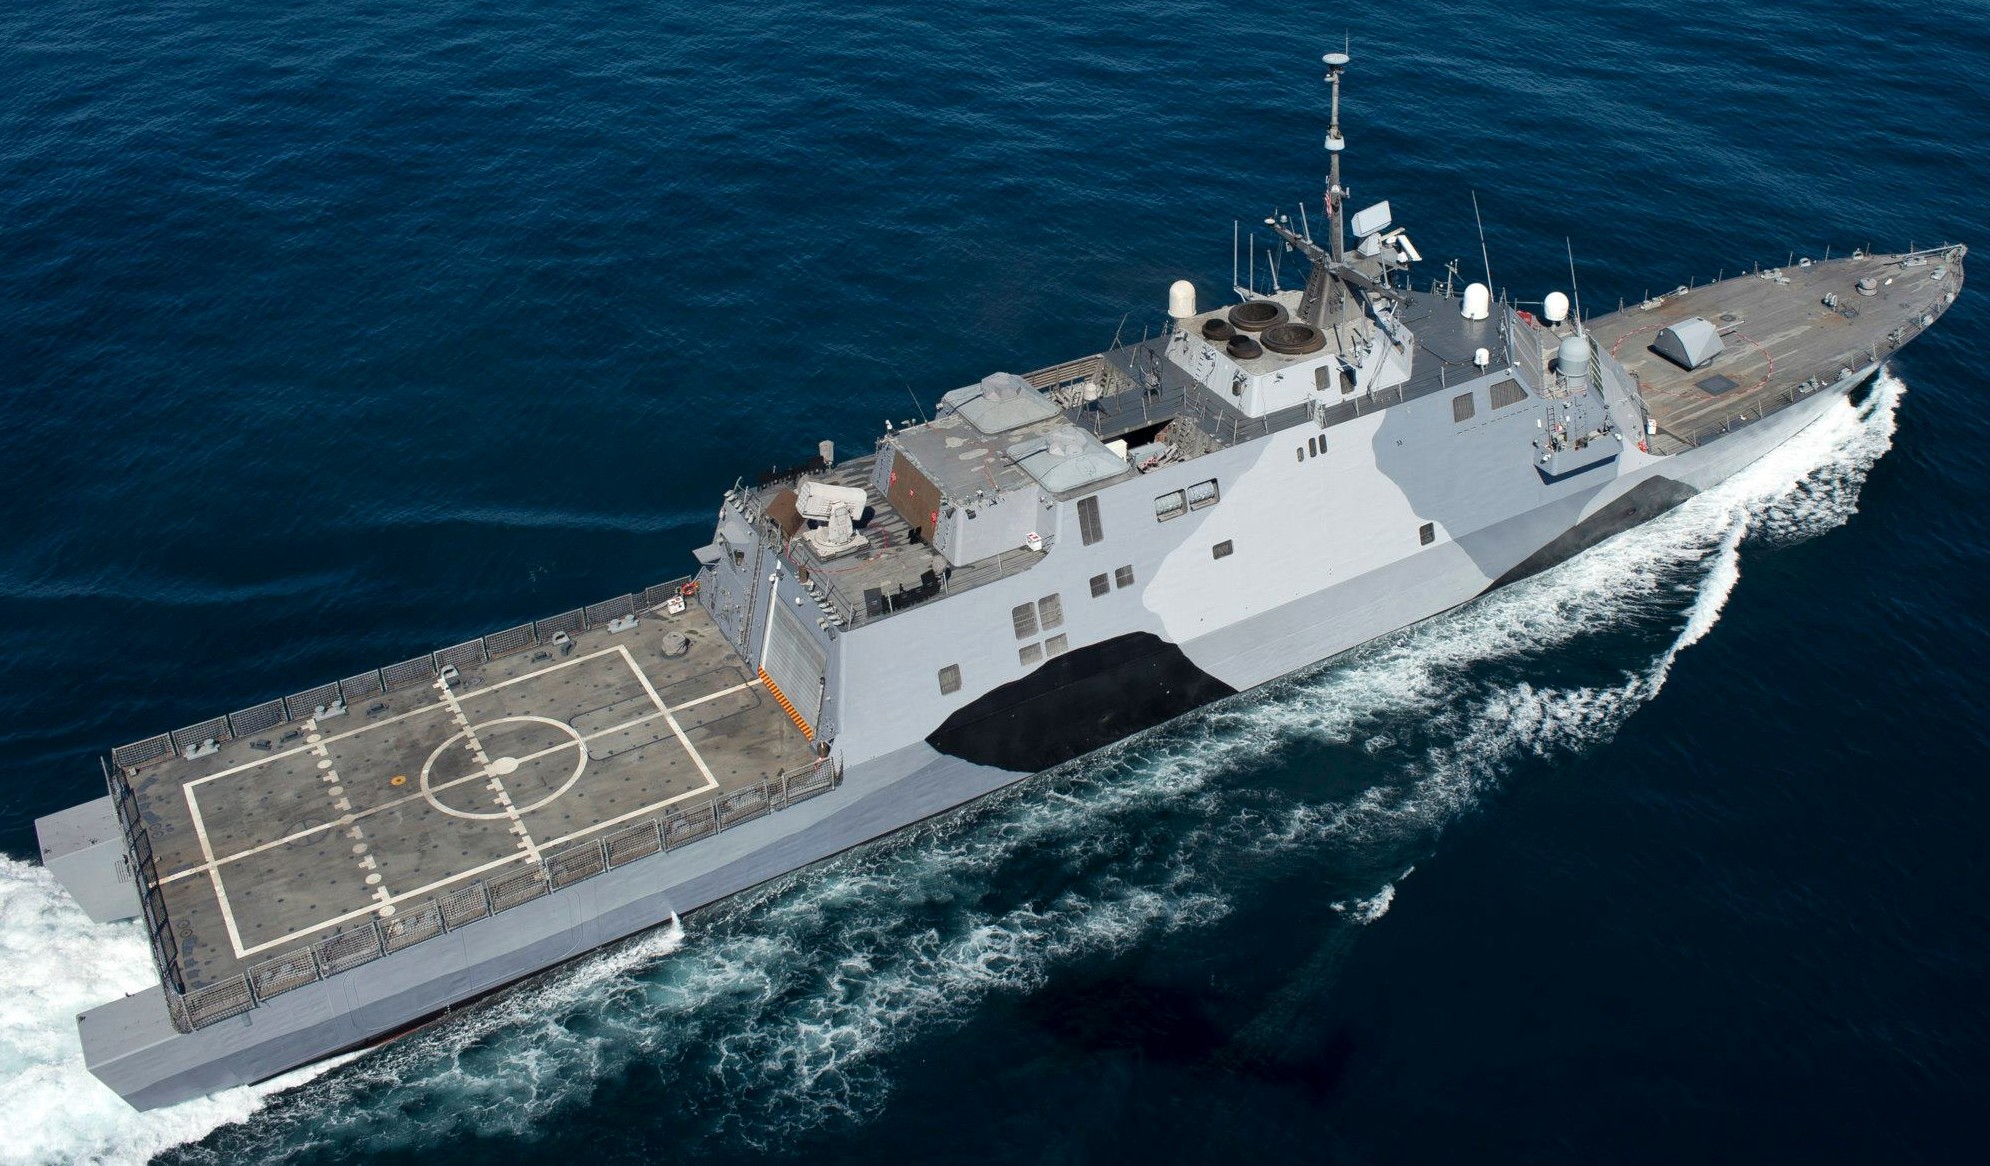 lcs-1 uss freedom class littoral combat ship us navy 55